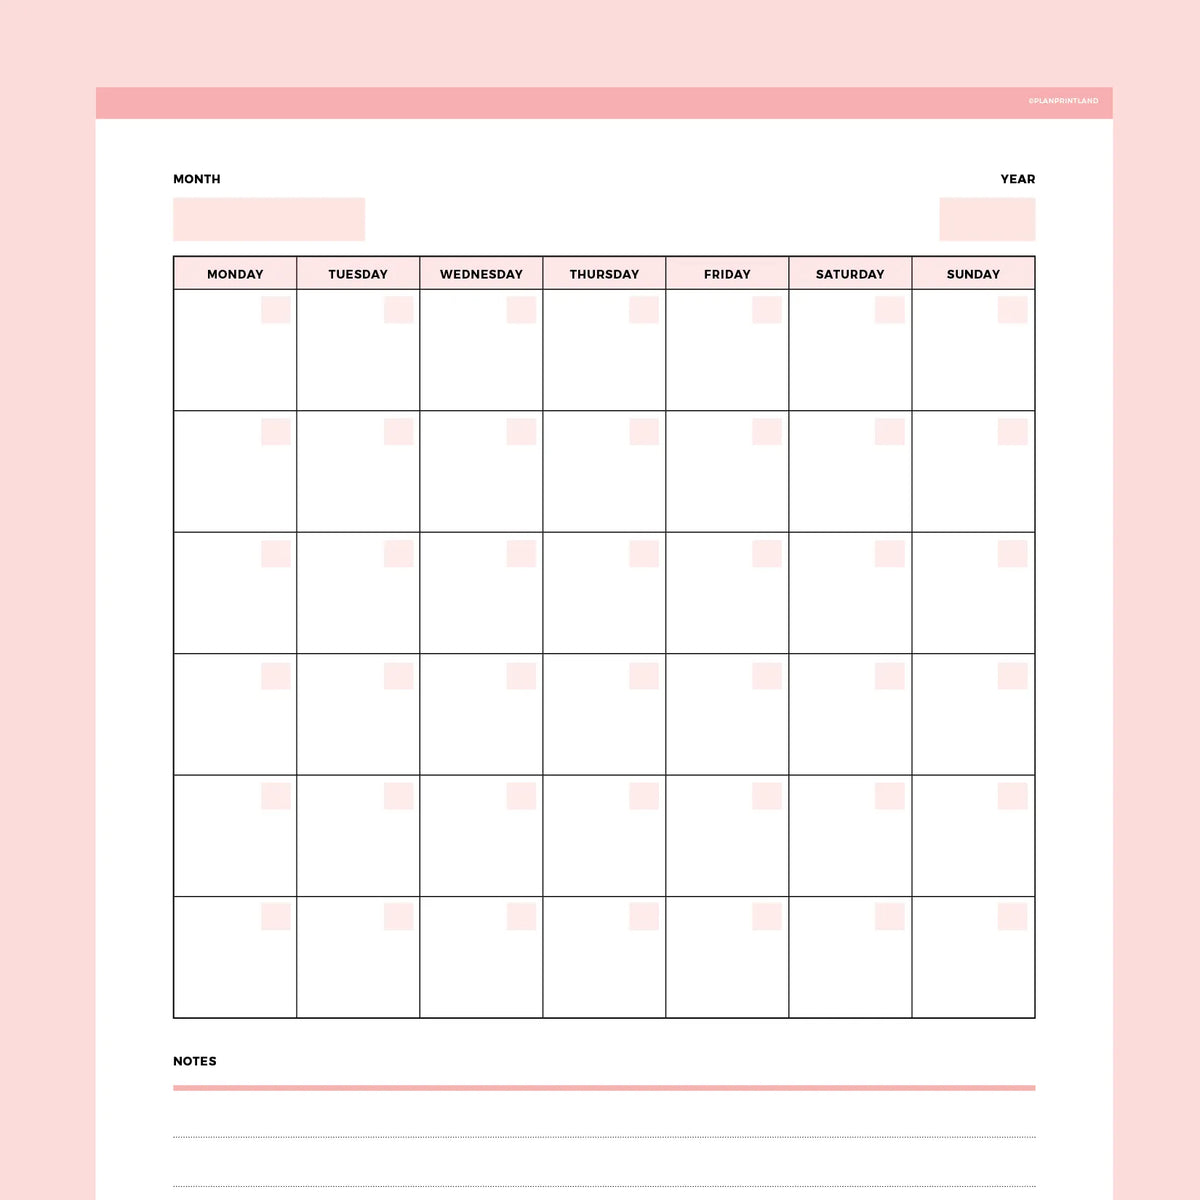 Printable Monthly Planner Templates